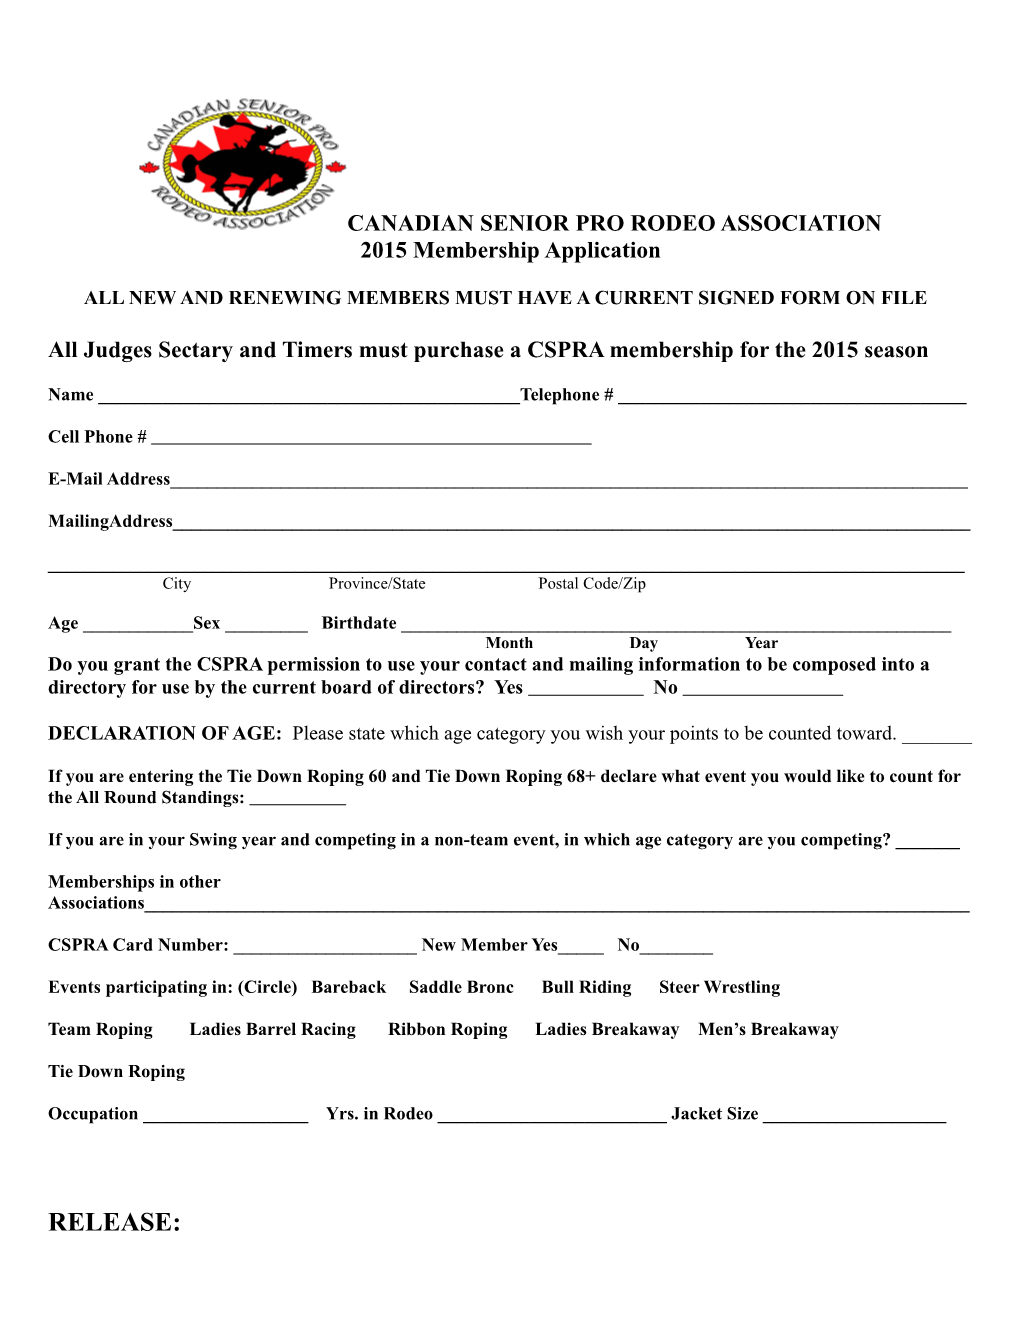 All New and Renewing Members Must Have a Current Signed Form on File